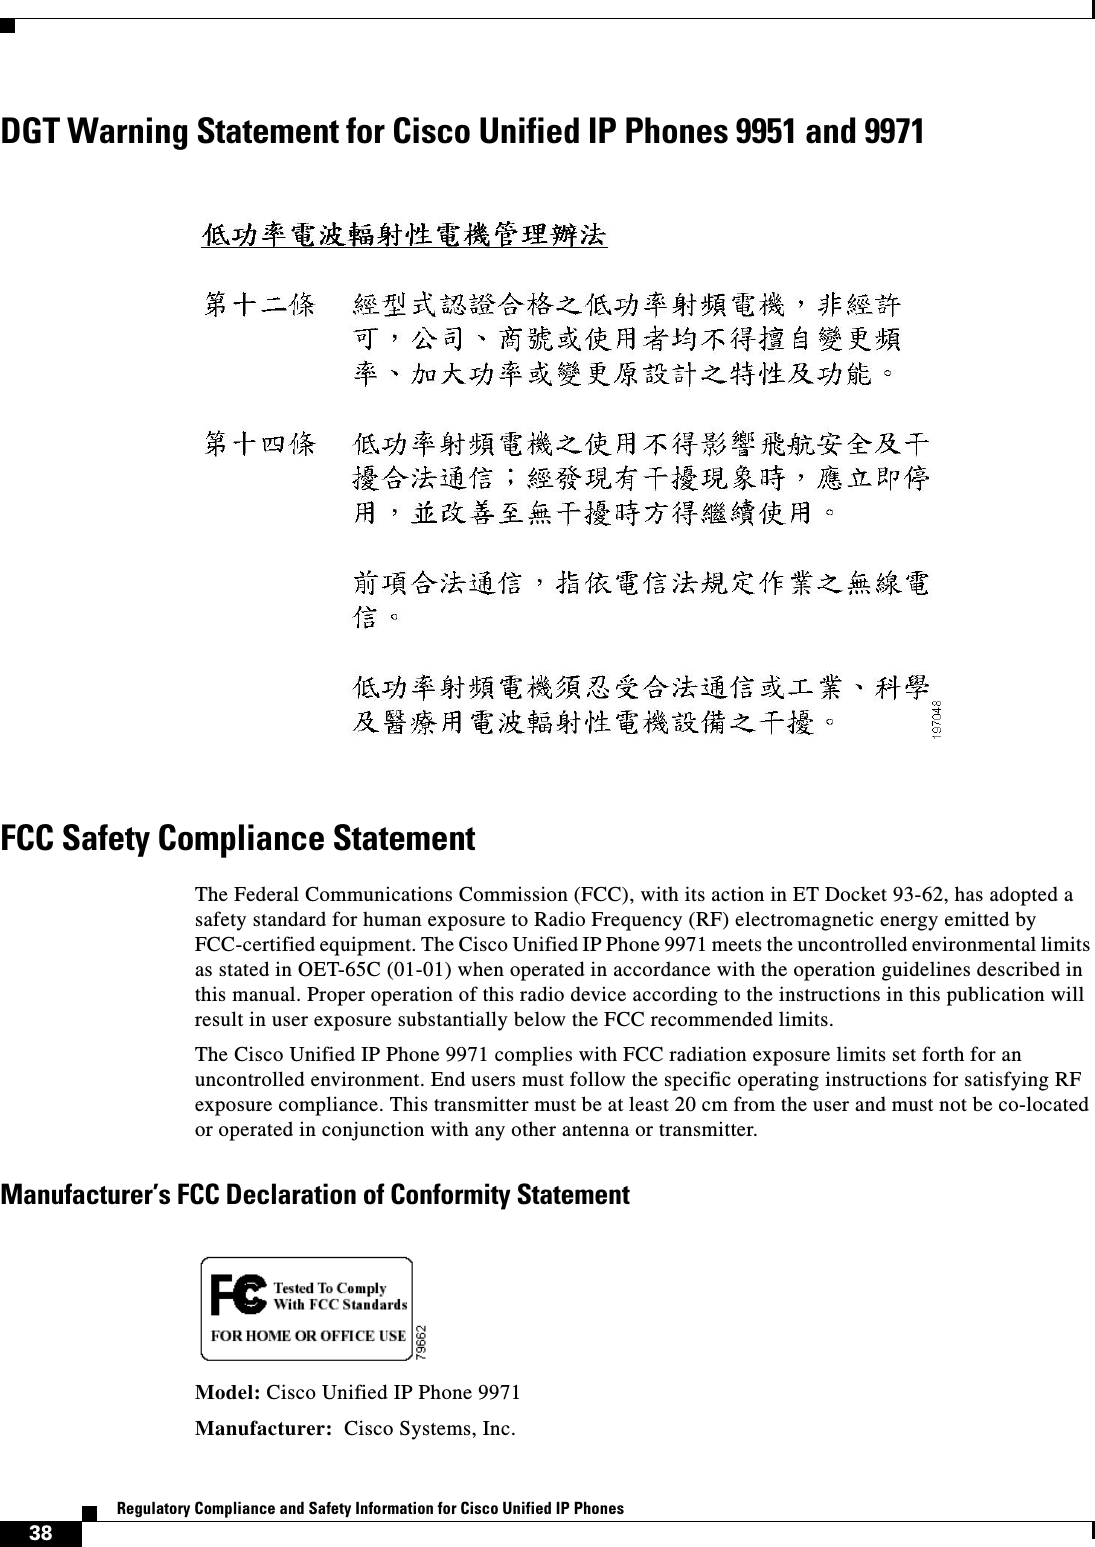  38Regulatory Compliance and Safety Information for Cisco Unified IP PhonesDGT Warning Statement for Cisco Unified IP Phones 9951 and 9971FCC Safety Compliance StatementThe Federal Communications Commission (FCC), with its action in ET Docket 93-62, has adopted a safety standard for human exposure to Radio Frequency (RF) electromagnetic energy emitted by FCC-certified equipment. The Cisco Unified IP Phone 9971 meets the uncontrolled environmental limits as stated in OET-65C (01-01) when operated in accordance with the operation guidelines described in this manual. Proper operation of this radio device according to the instructions in this publication will result in user exposure substantially below the FCC recommended limits.The Cisco Unified IP Phone 9971 complies with FCC radiation exposure limits set forth for an uncontrolled environment. End users must follow the specific operating instructions for satisfying RF exposure compliance. This transmitter must be at least 20 cm from the user and must not be co-located or operated in conjunction with any other antenna or transmitter.Manufacturer’s FCC Declaration of Conformity StatementModel: Cisco Unified IP Phone 9971Manufacturer:  Cisco Systems, Inc.